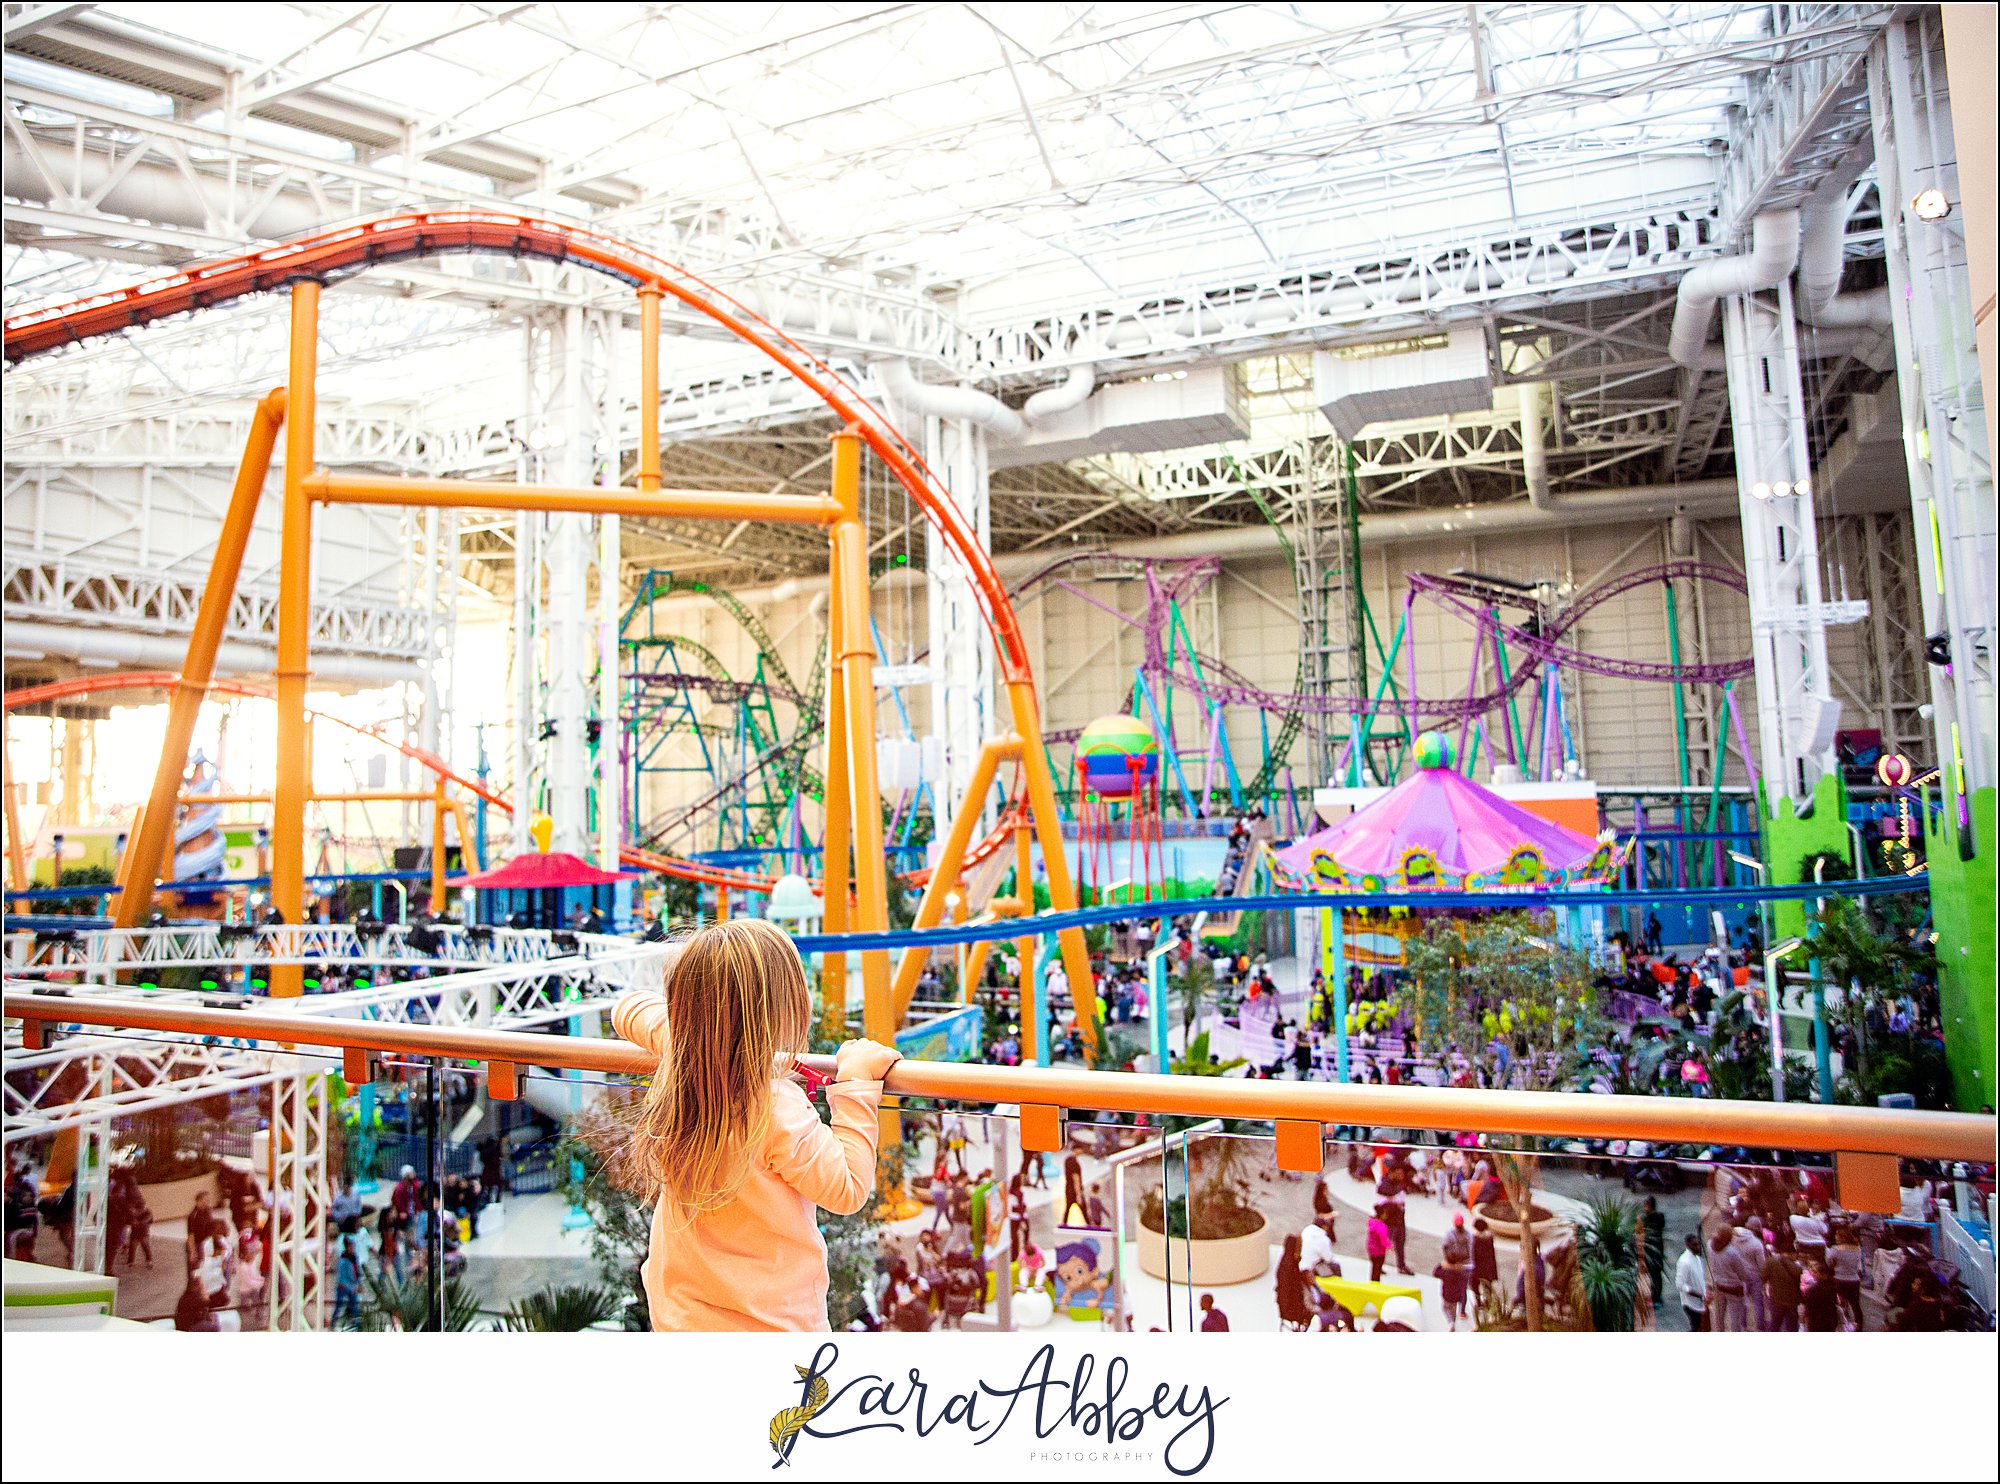 American Dream Mall Nickelodeon Universe Tips And Tricks 0028 